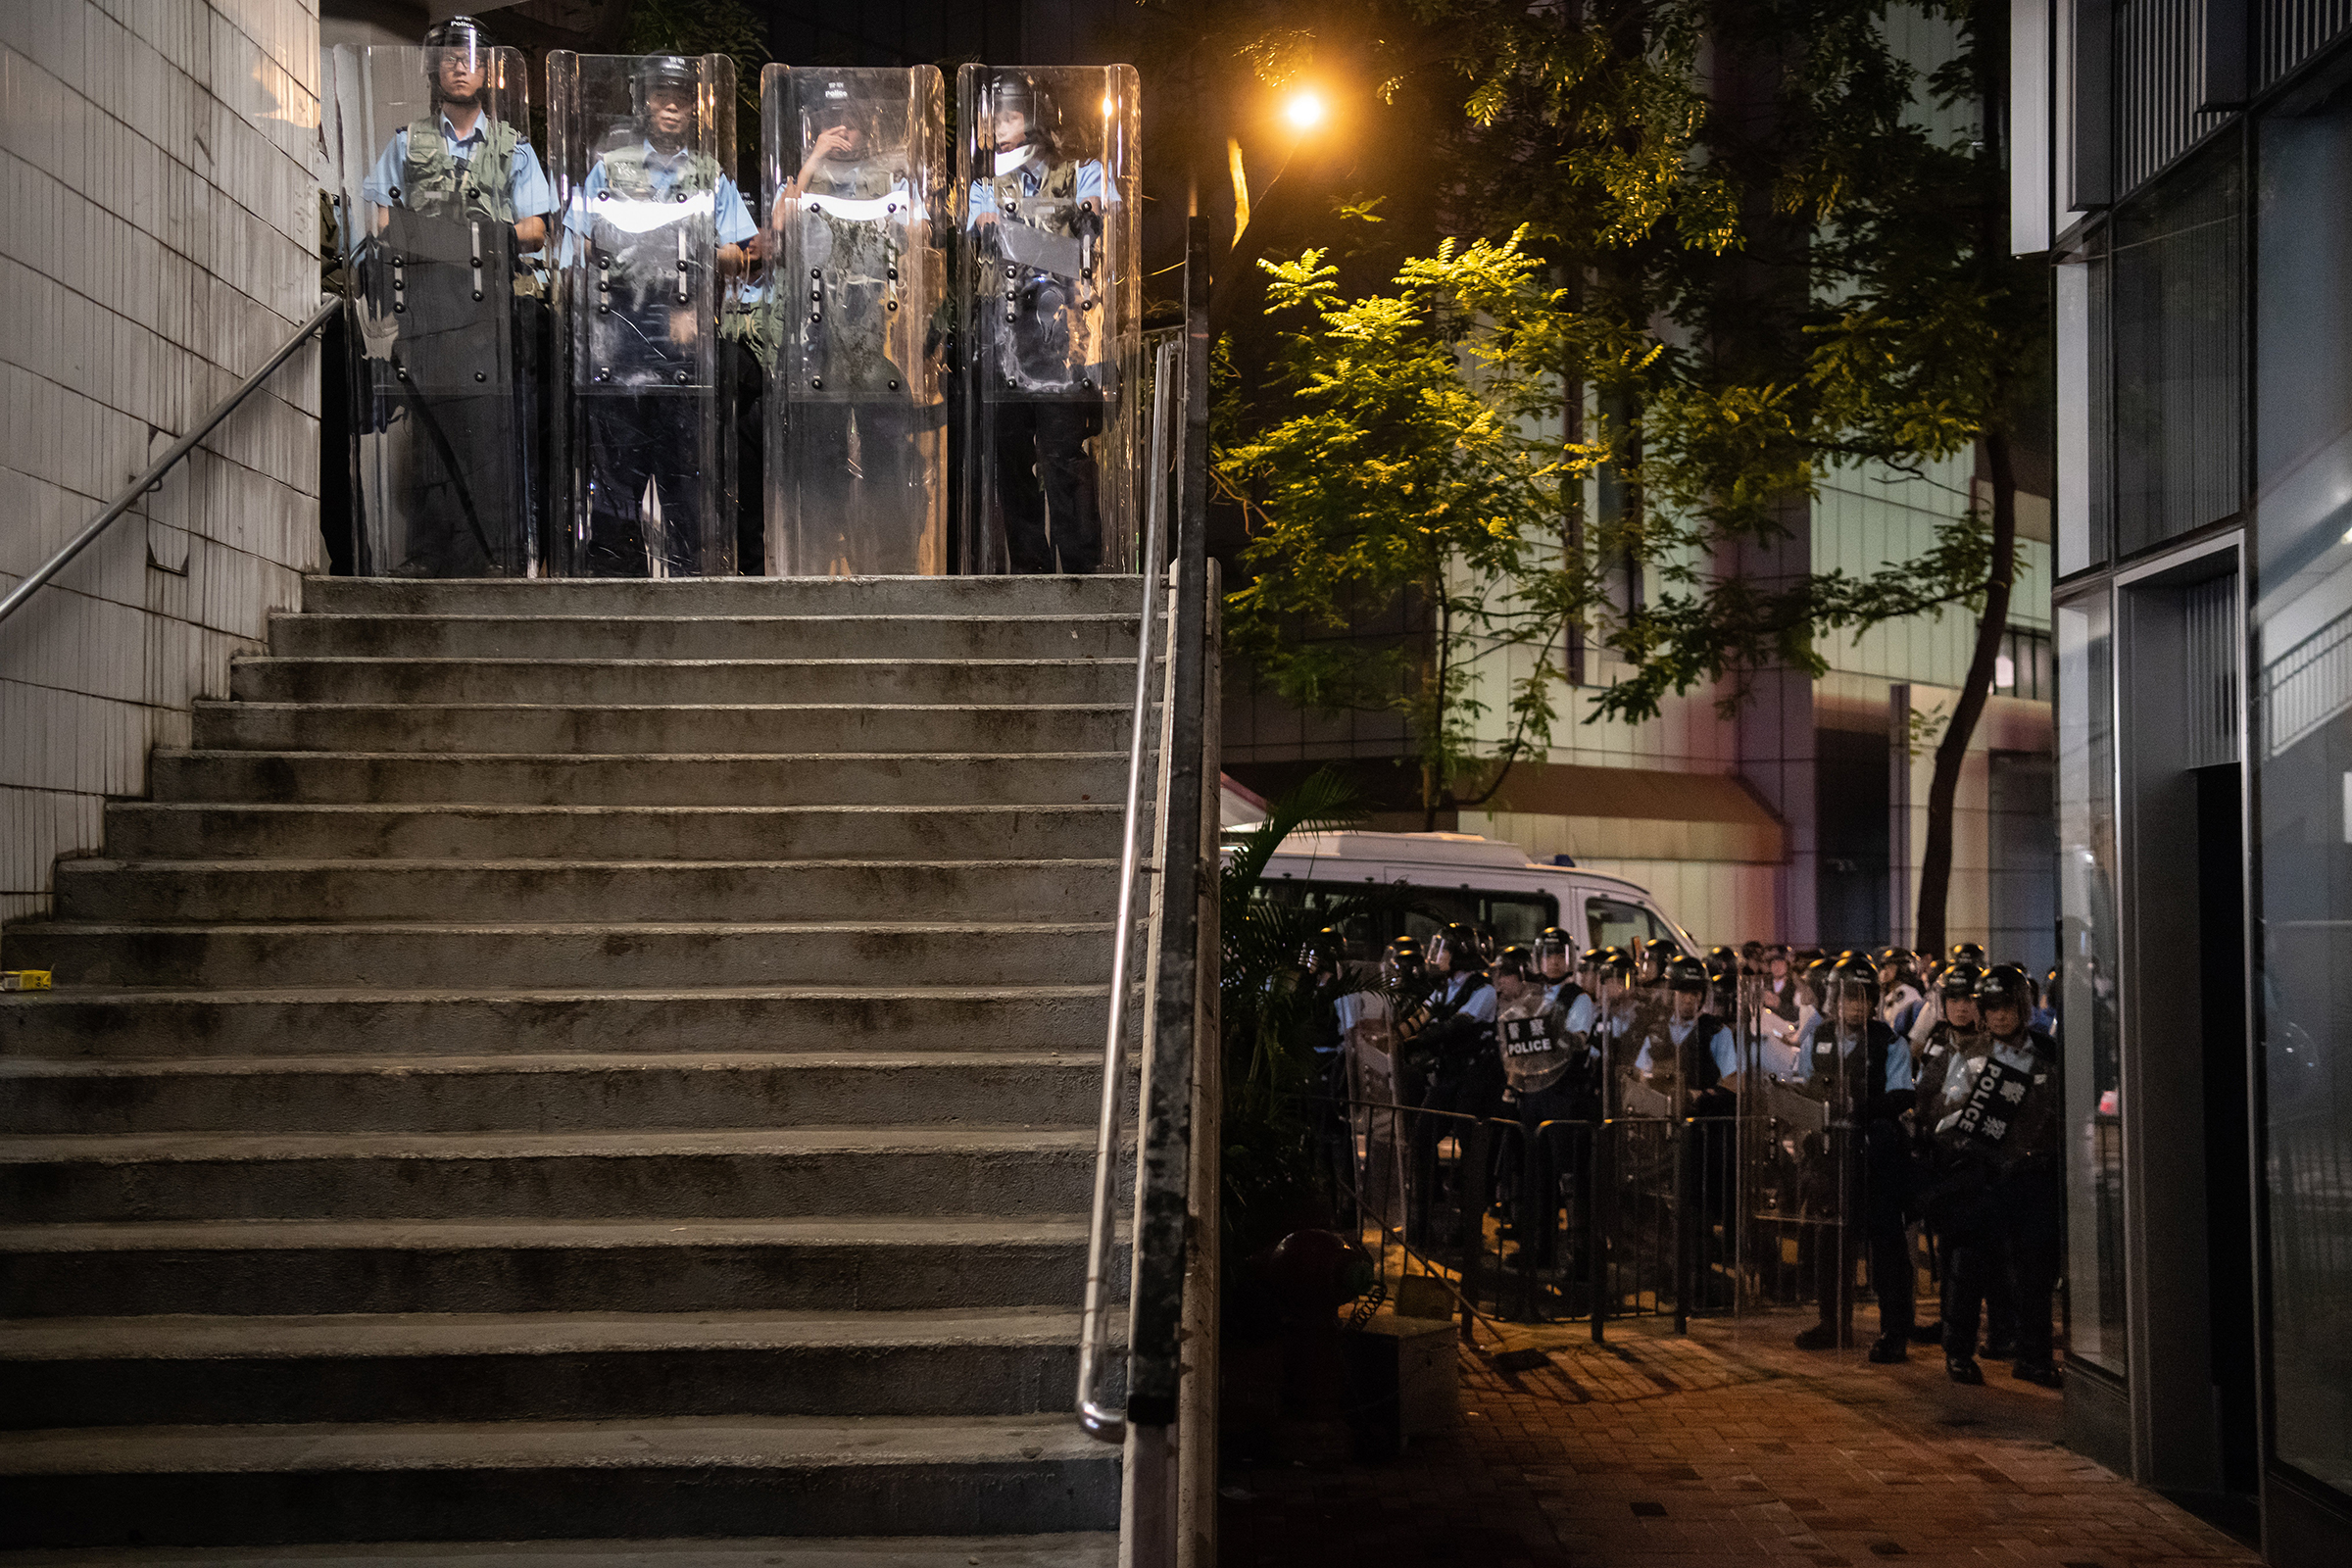 Police officers stand guard during a protest on June 12. (Billy H.C. Kwok—Getty Images)